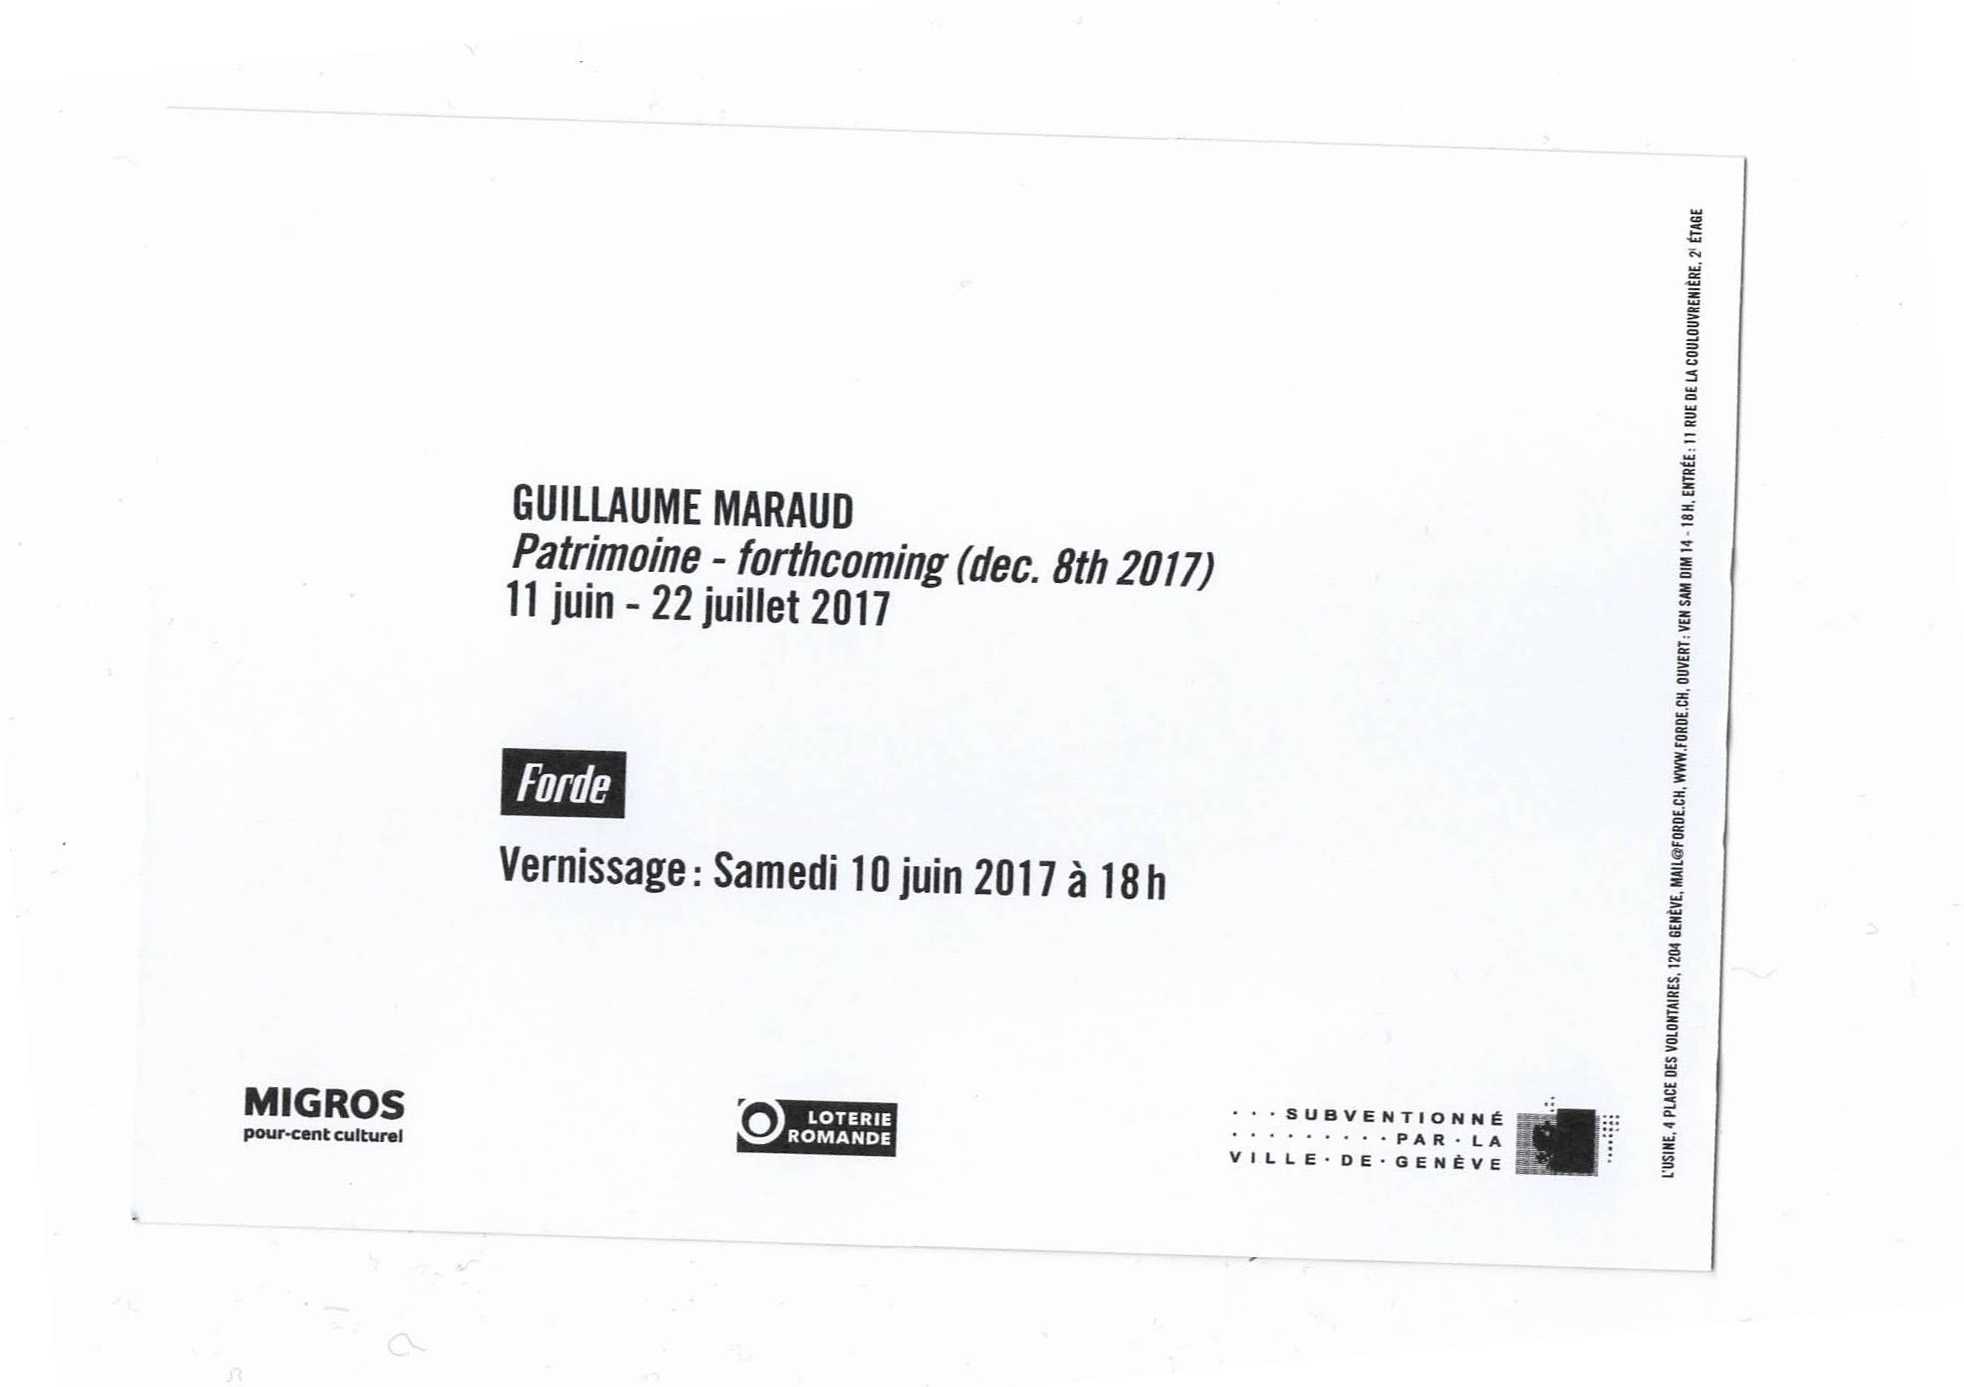 forde - flyer - Guillaume Maraud. Patrimoine – forthcoming (dec. 8th 2017)